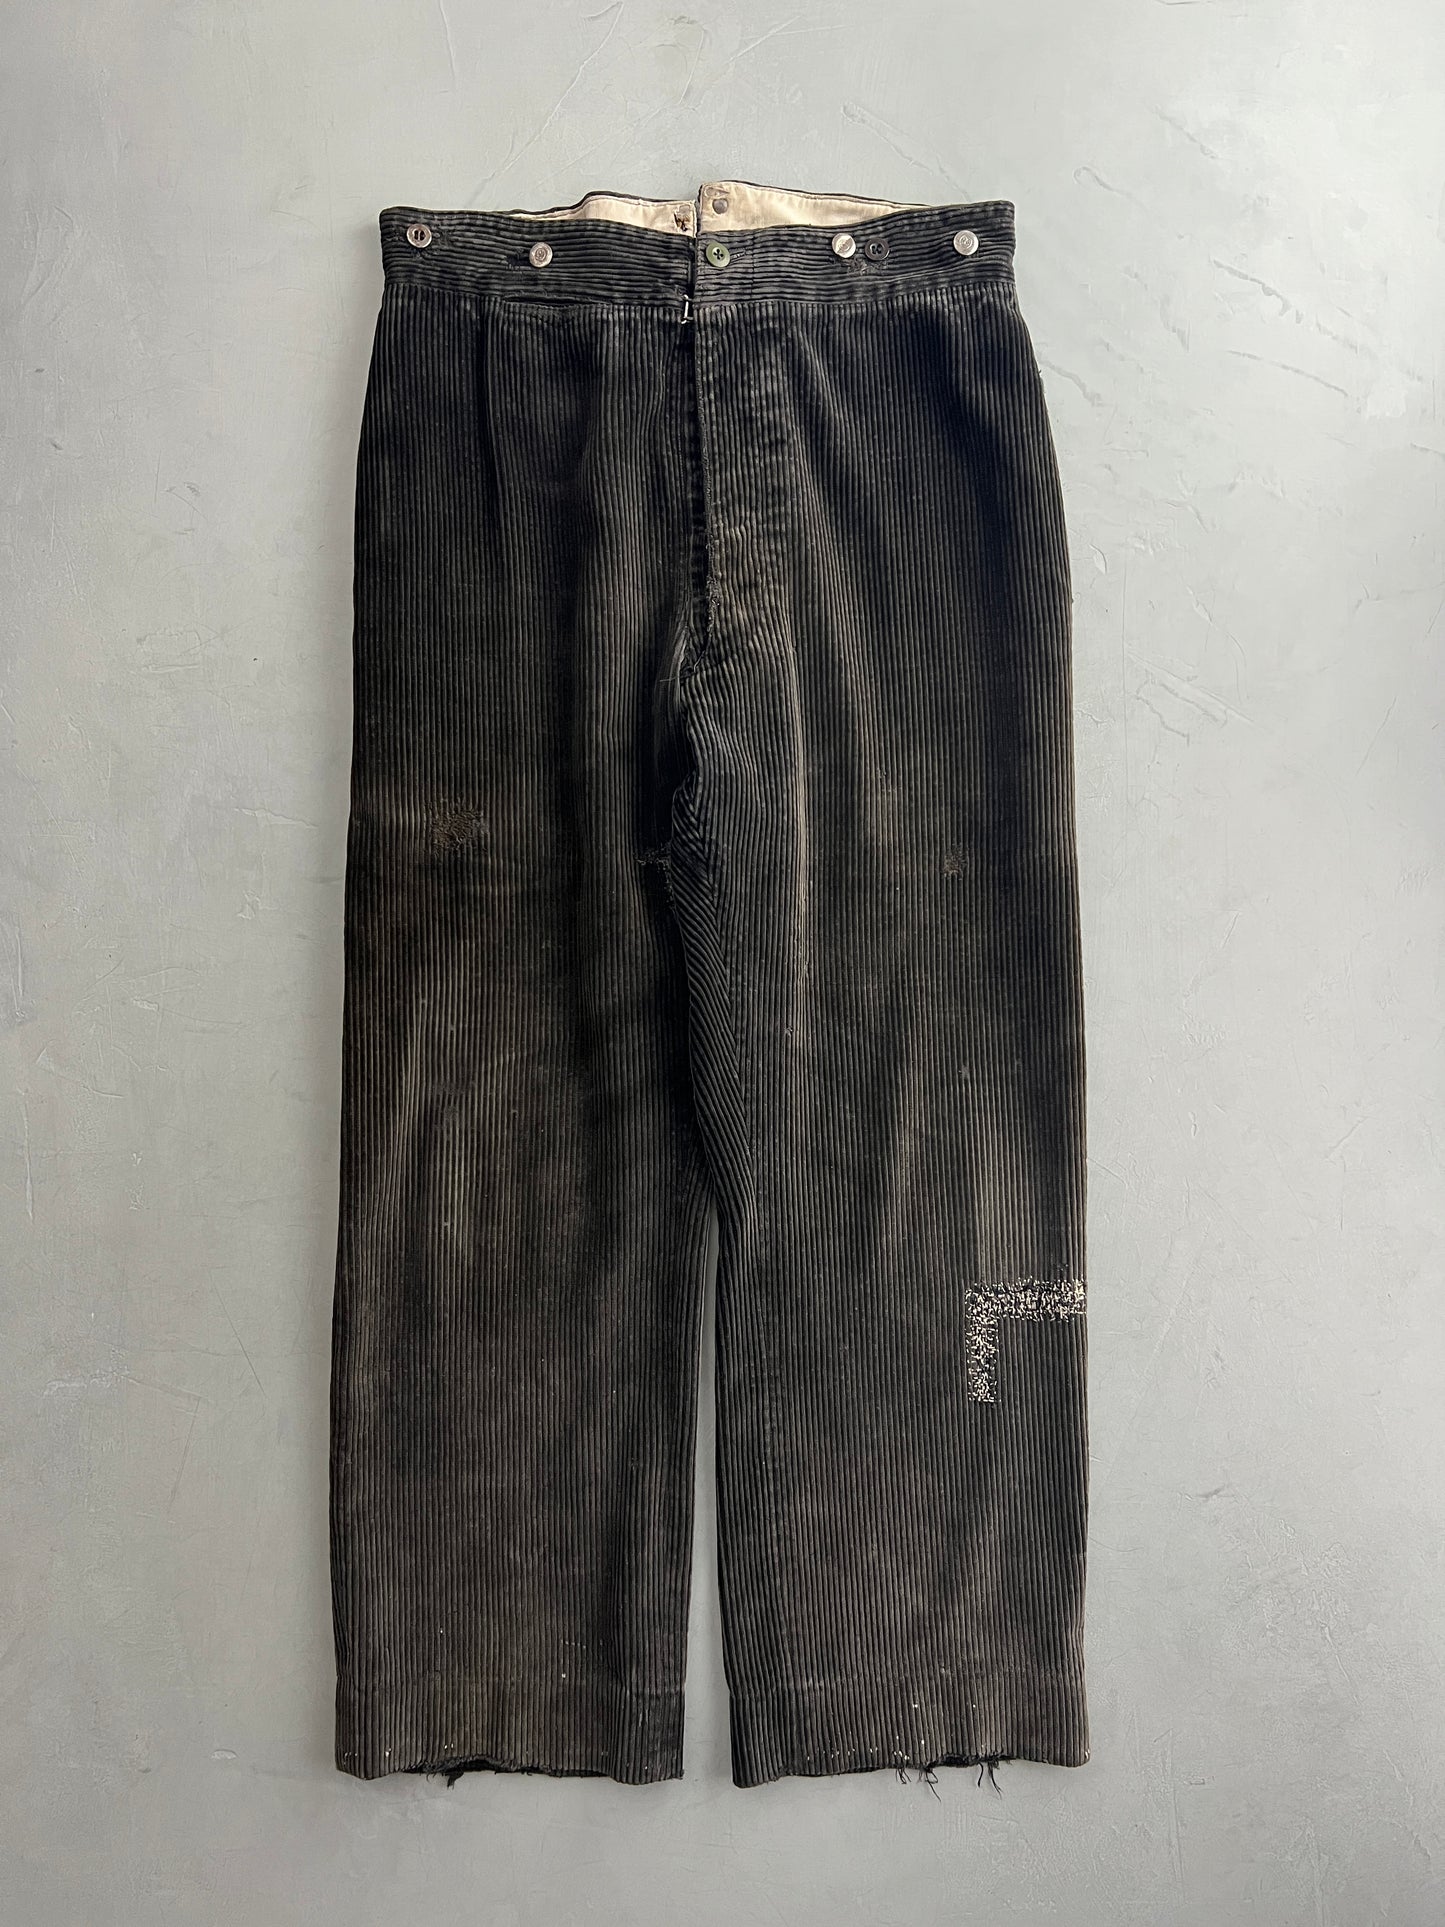 40's French Buckle Back Work Pants [35"]